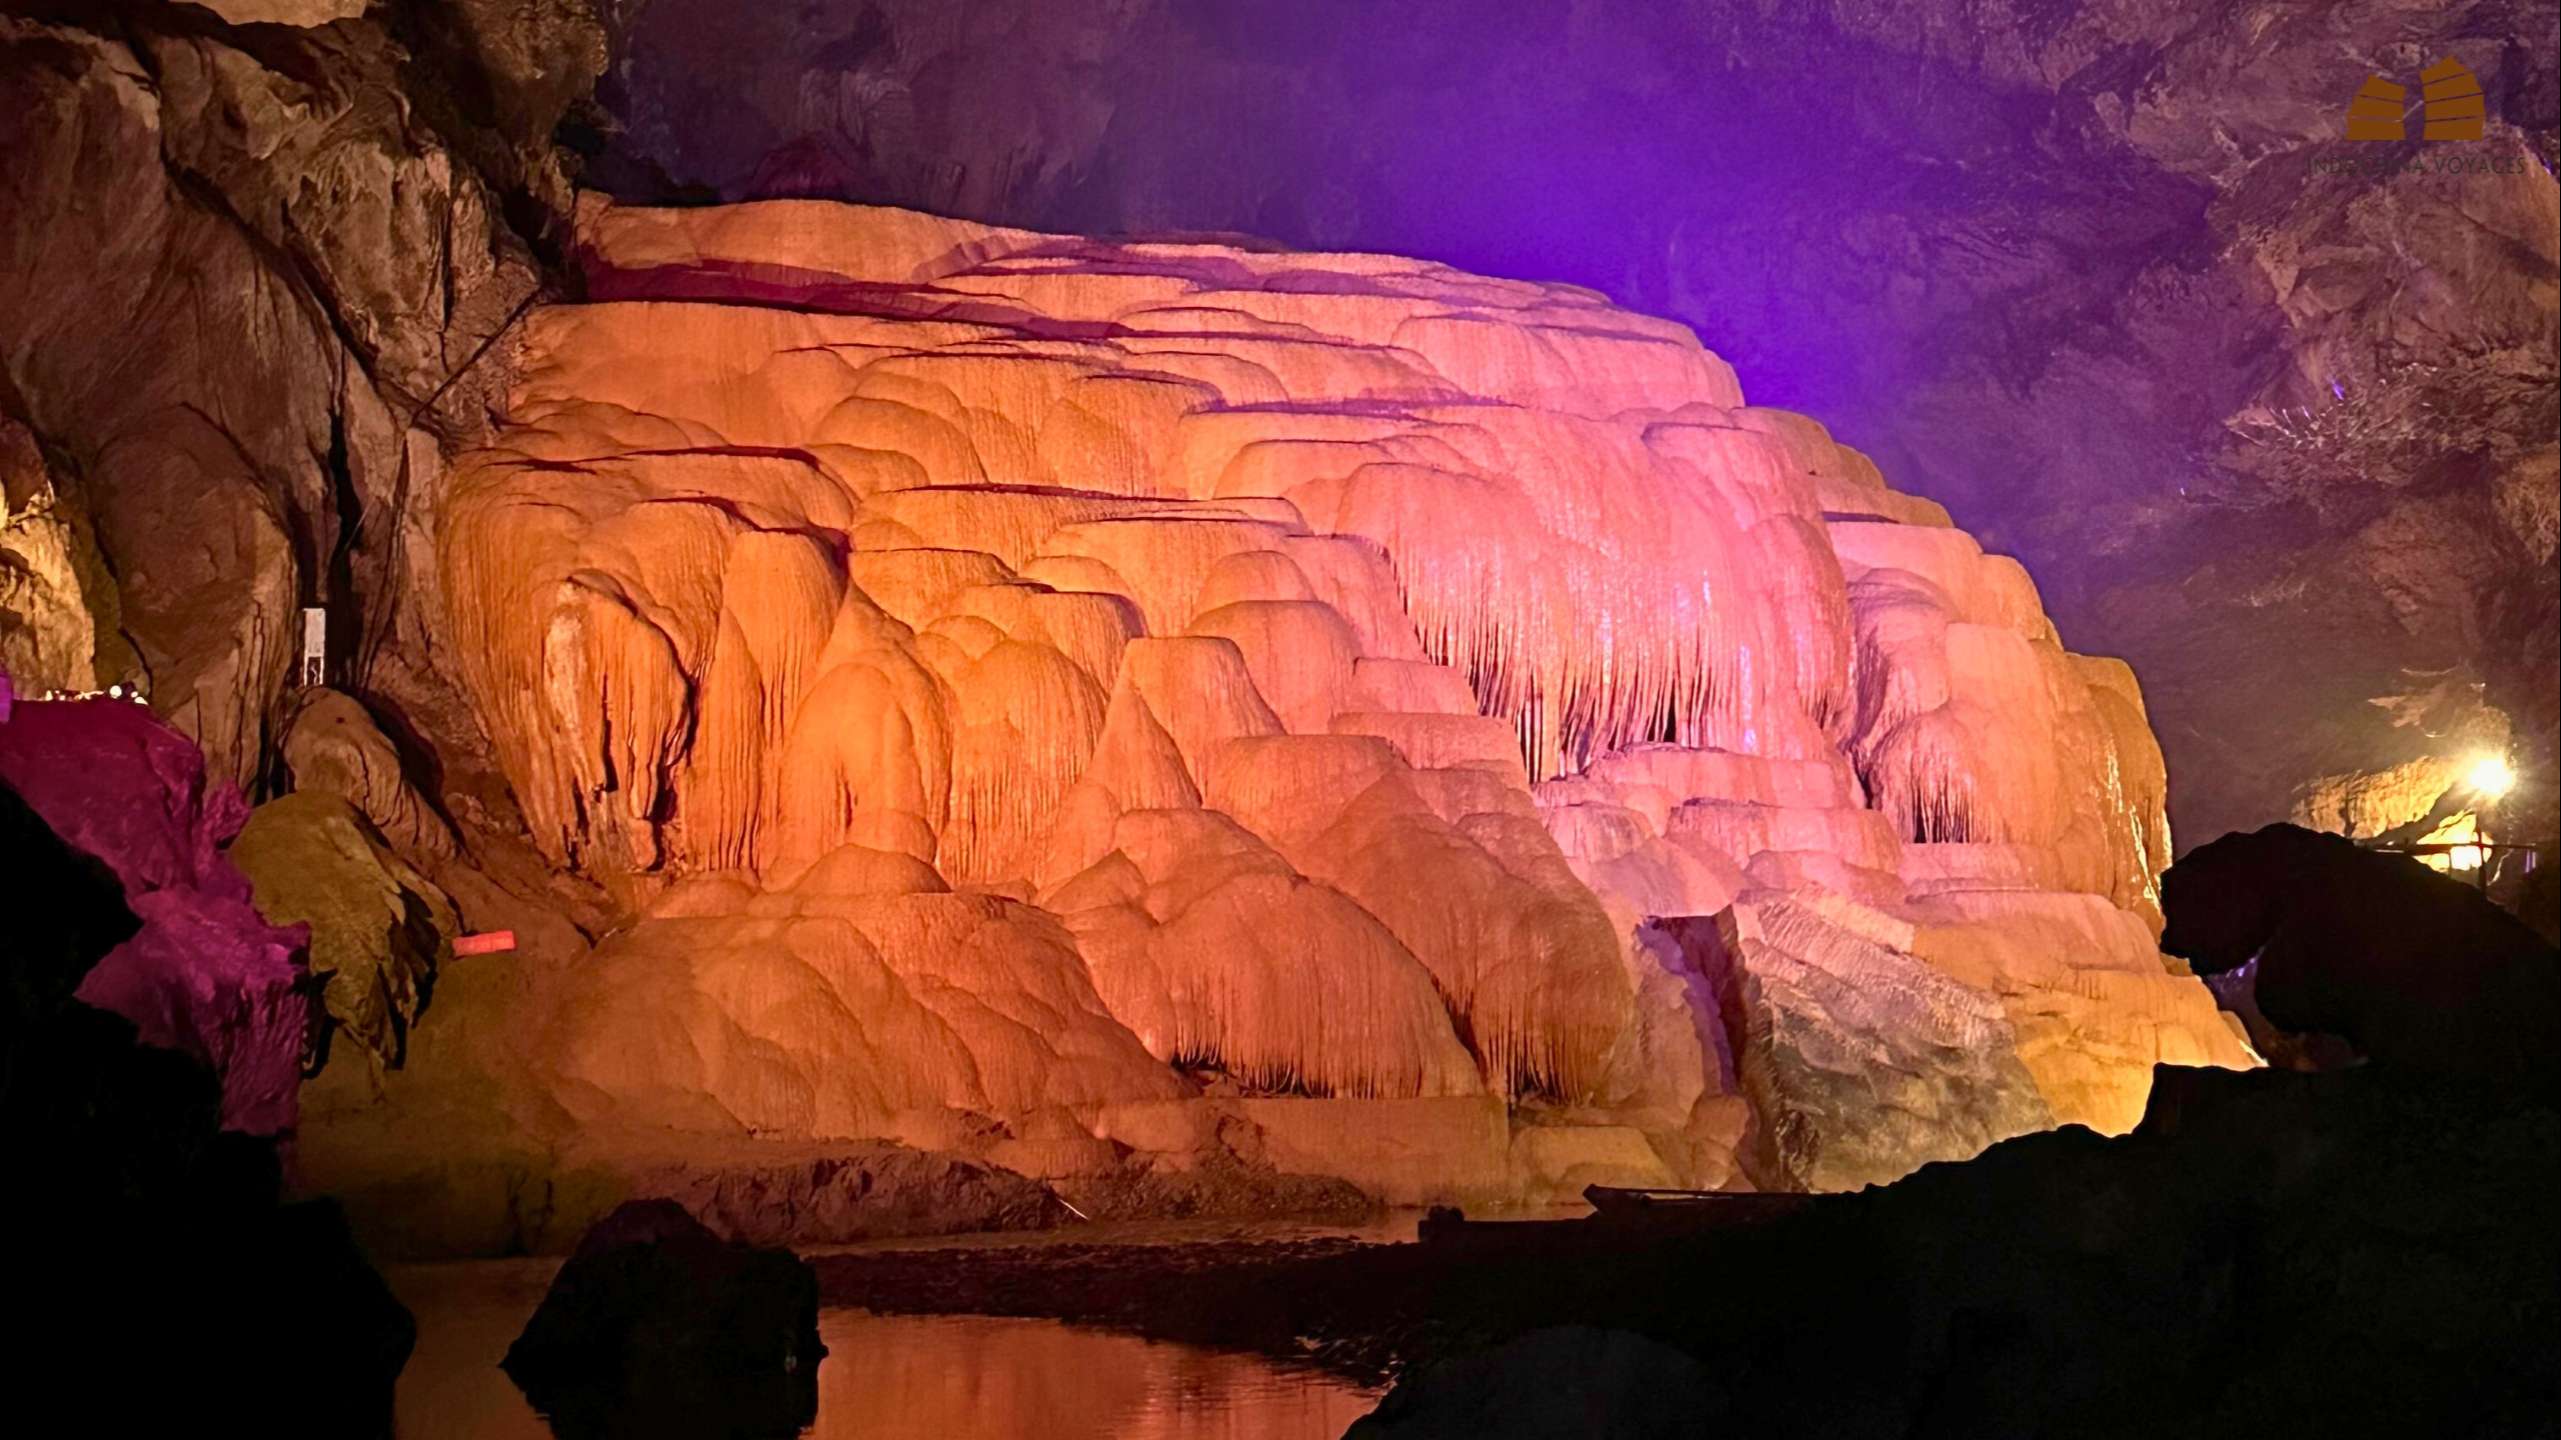 Nguom Ngao Cave: A Subterranean Symphony of Stalactites and Stalagmites in Vietnam